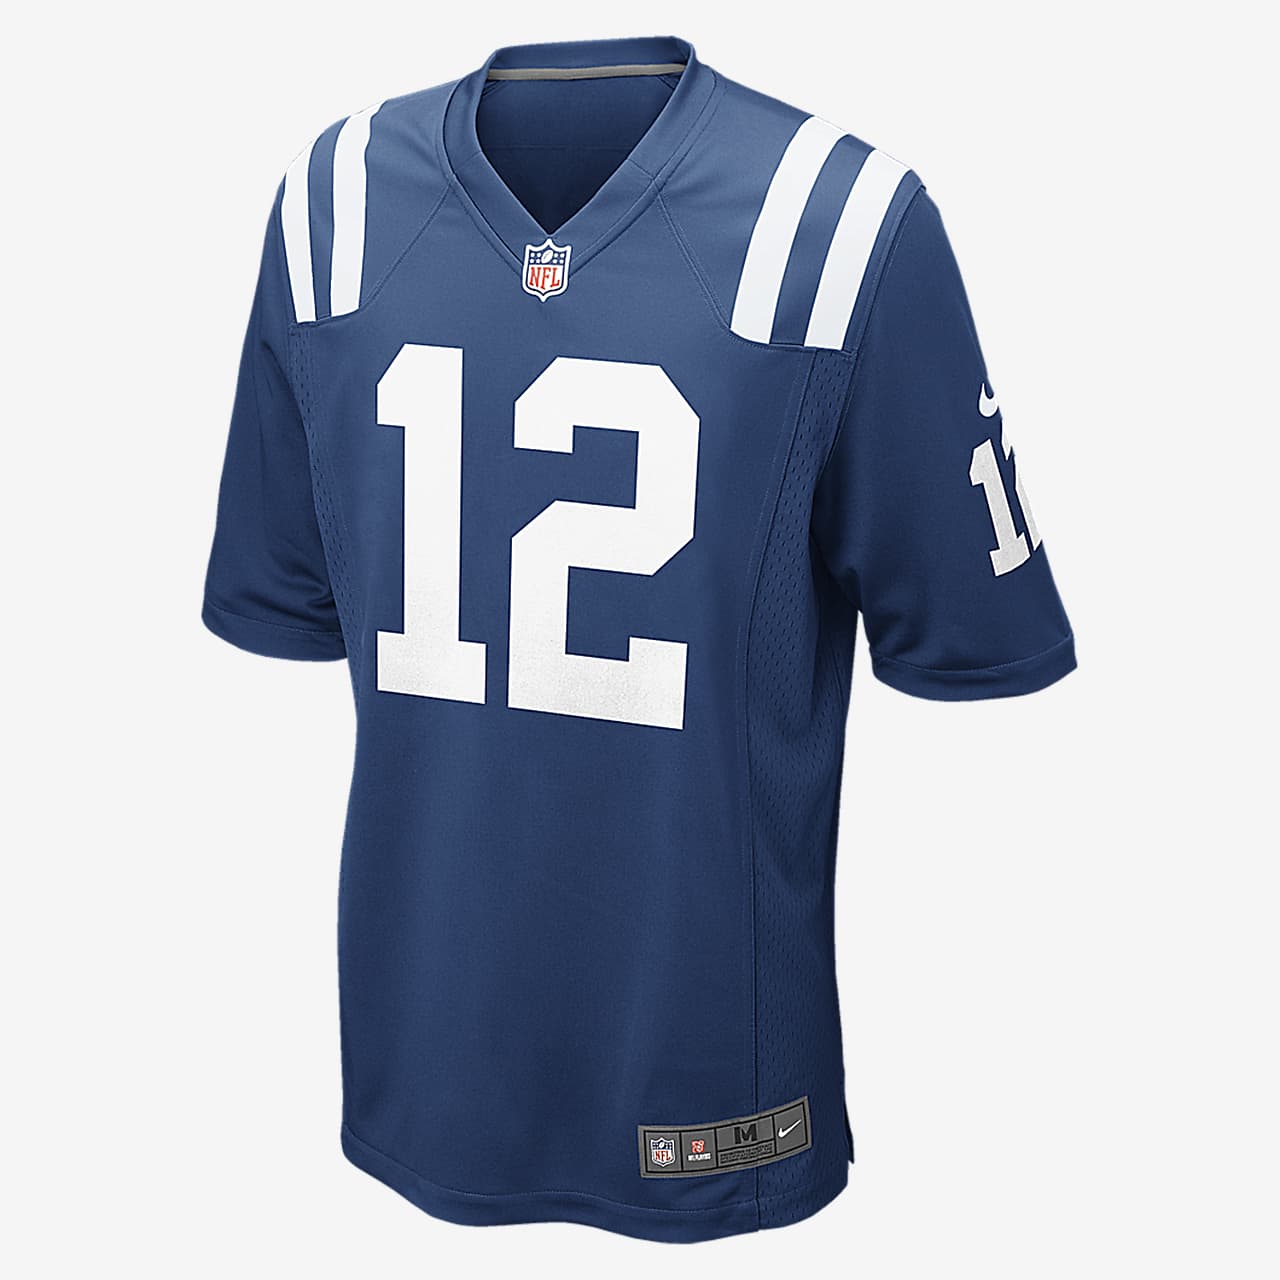 andrew luck toddler jersey